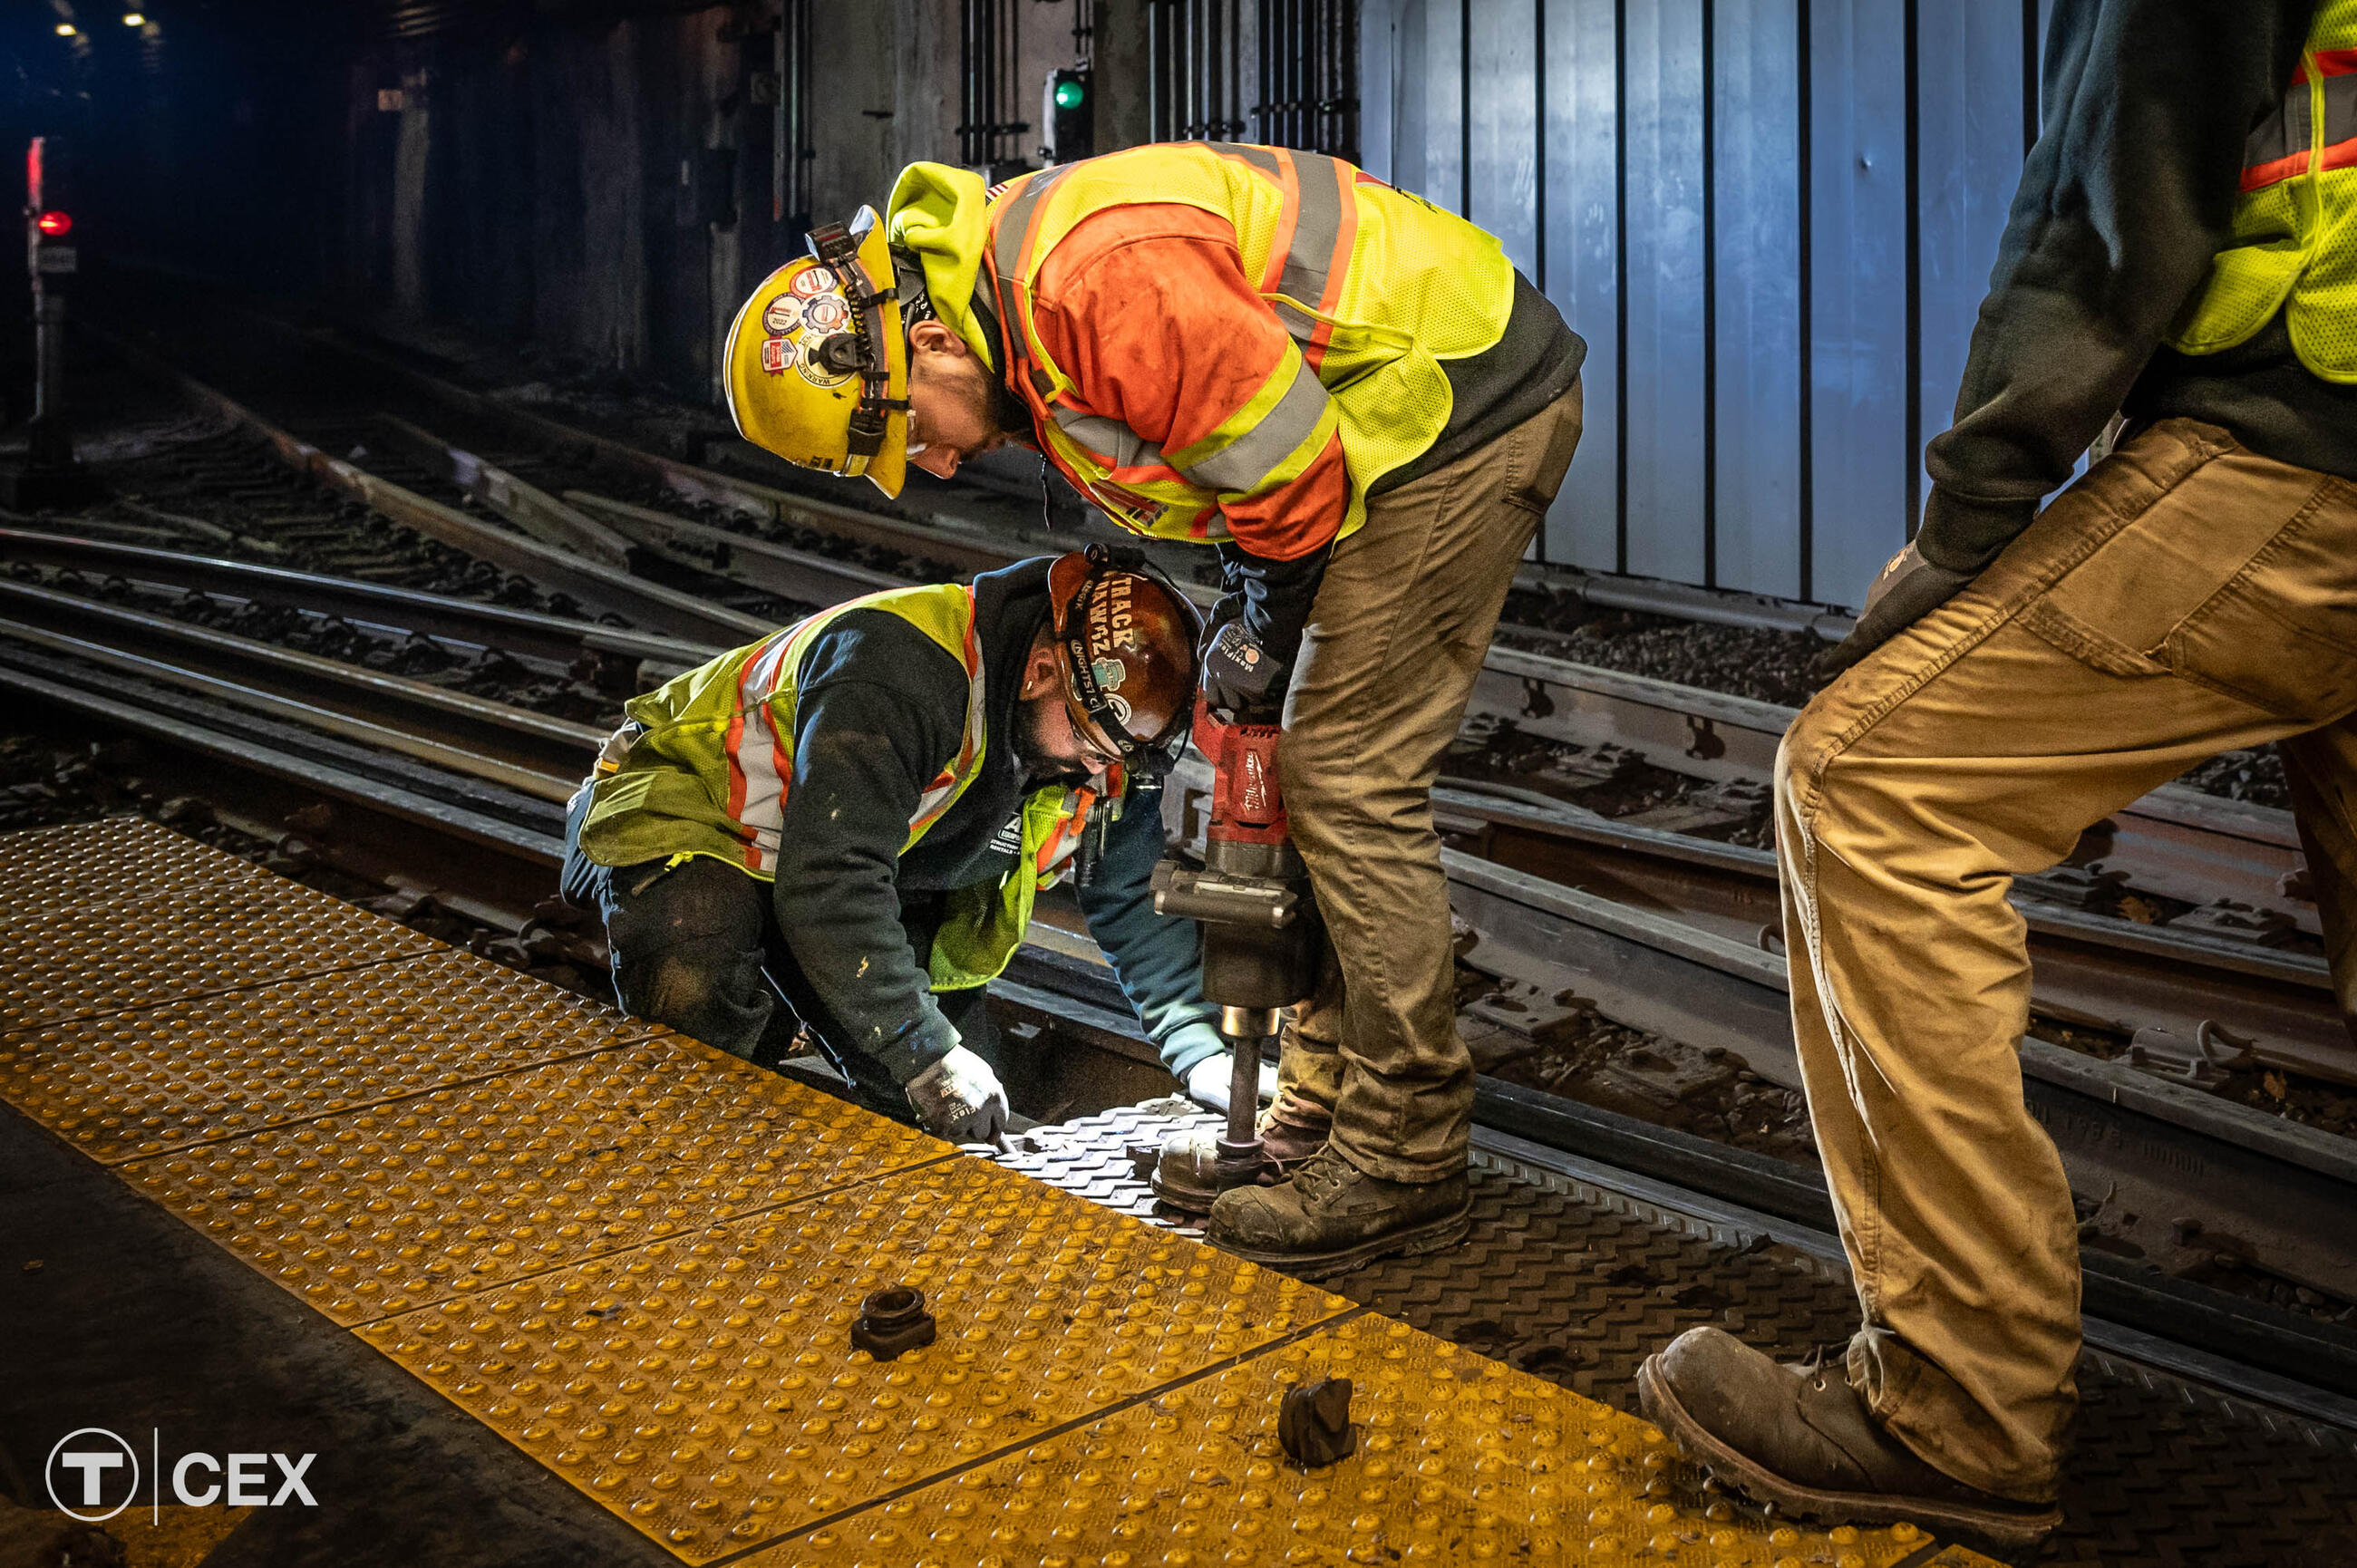 Crews performed work within Green Line stations. Complimentary photo by the MBTA Customer and Employee Experience Department.